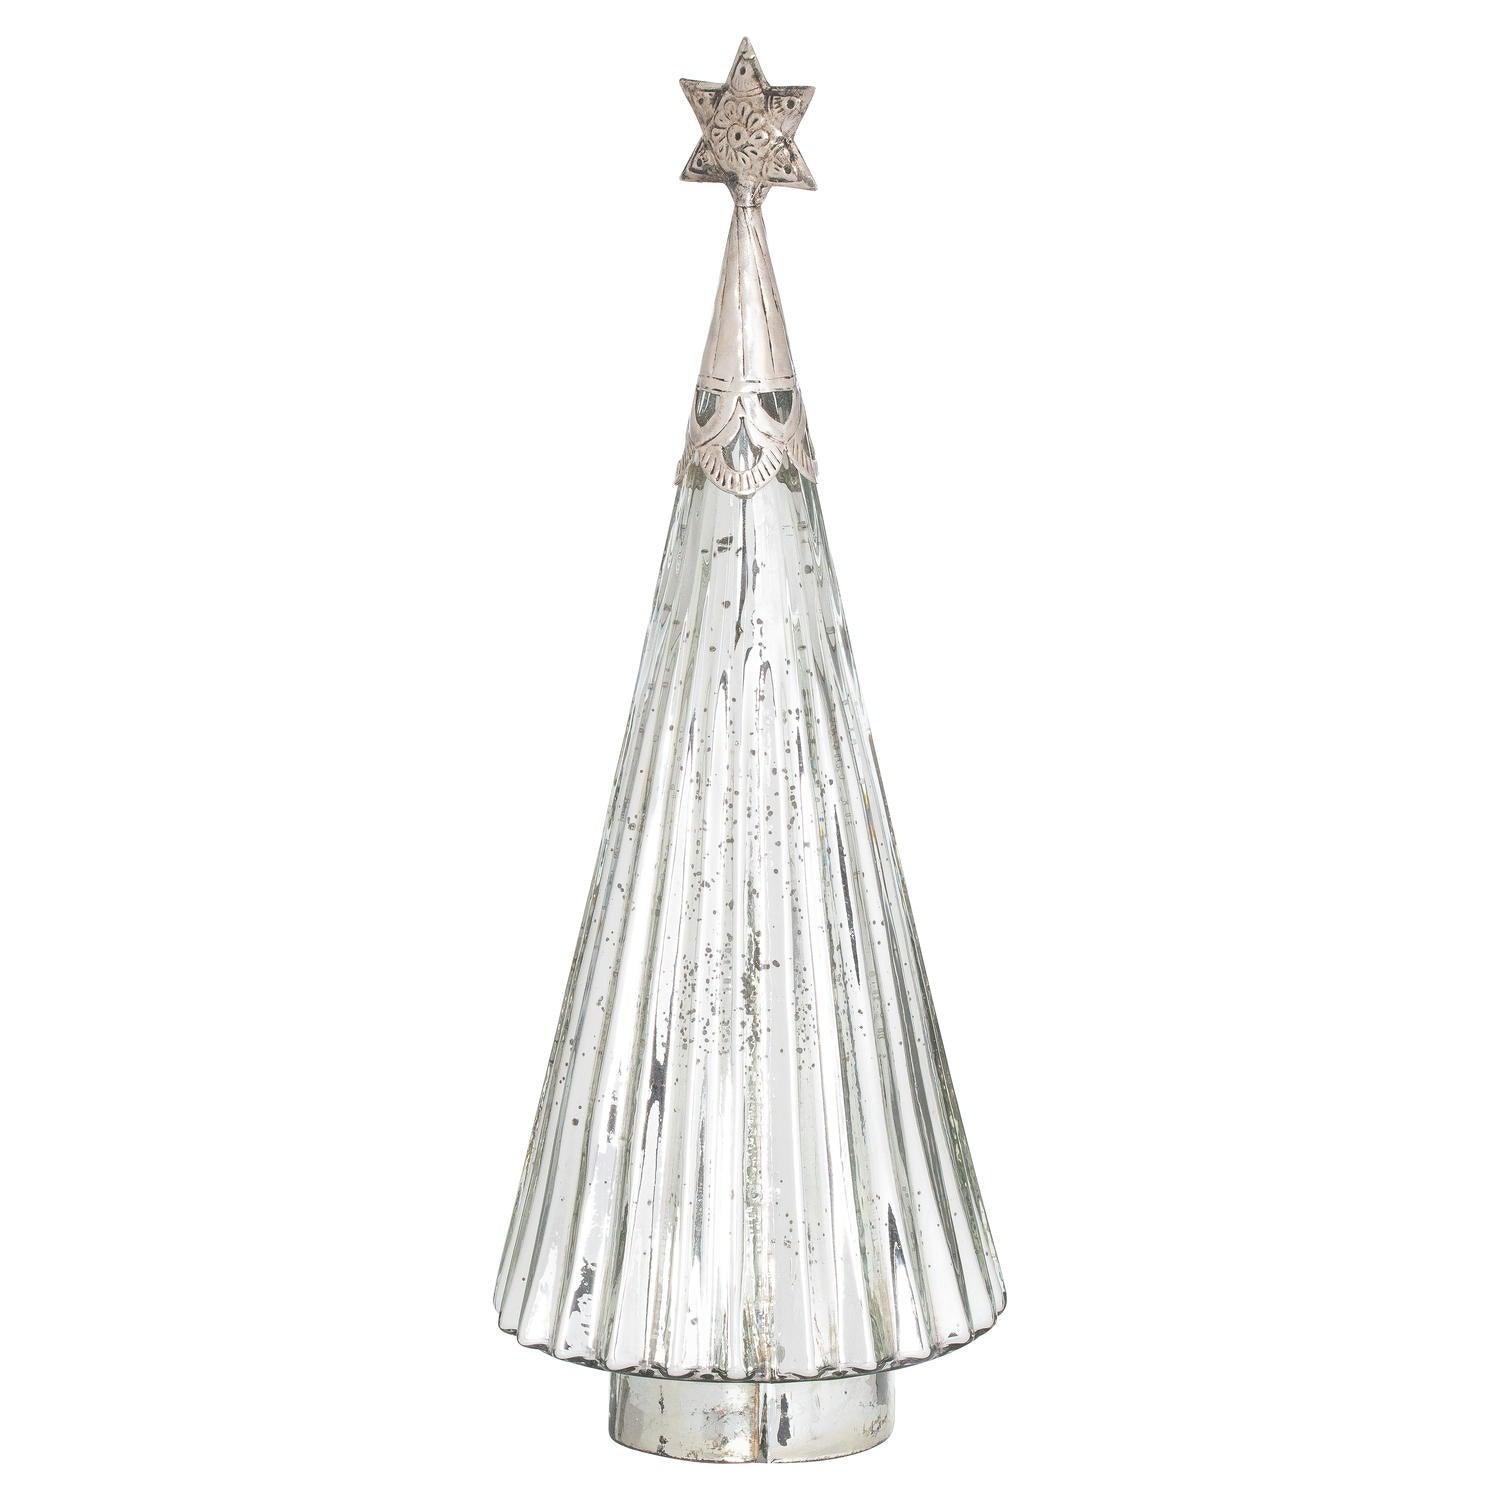 View The Noel Collection Star Topped Glass Decorative Large Tree information